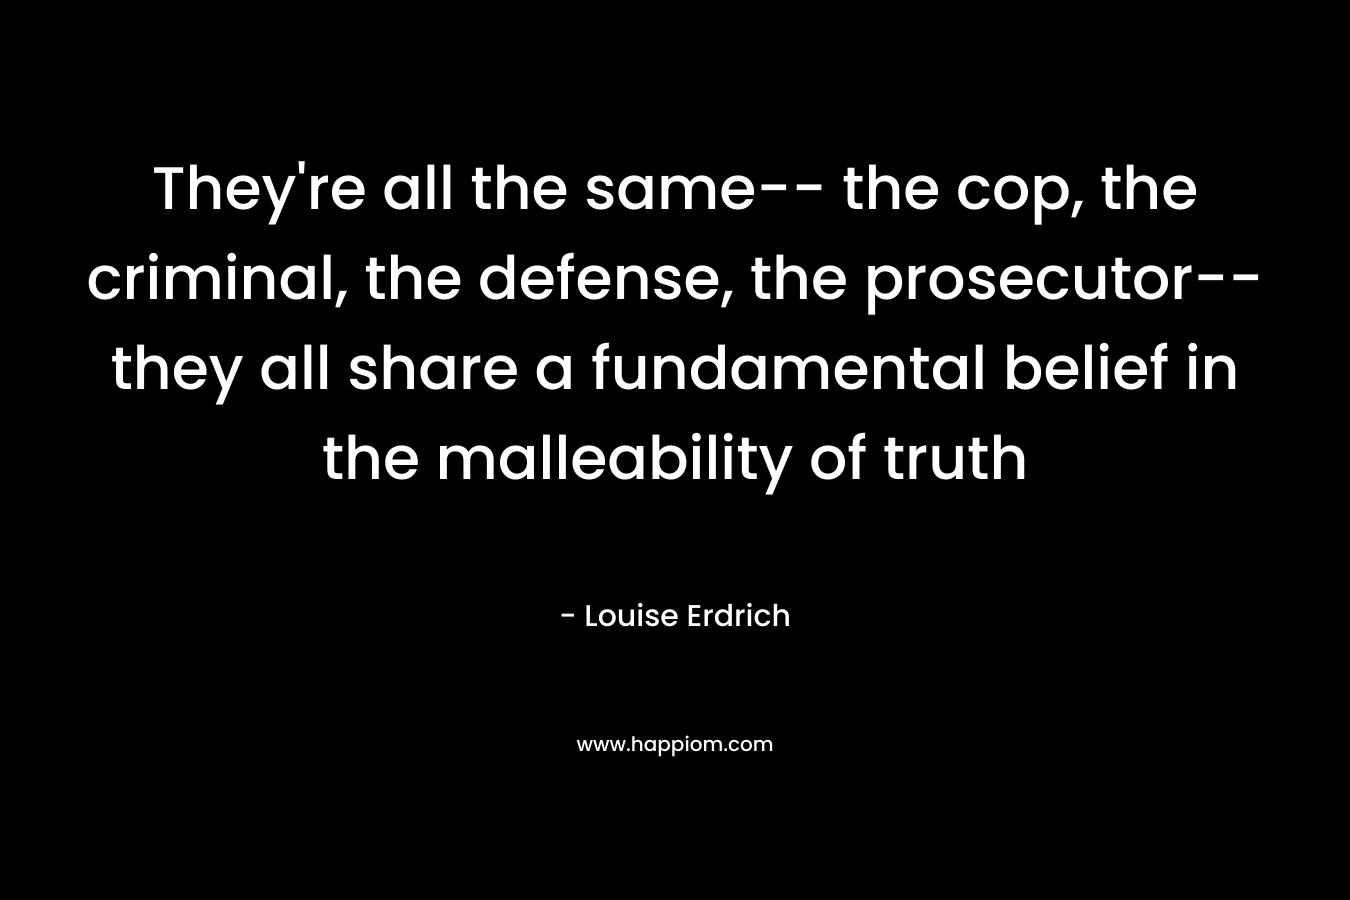 They're all the same-- the cop, the criminal, the defense, the prosecutor-- they all share a fundamental belief in the malleability of truth